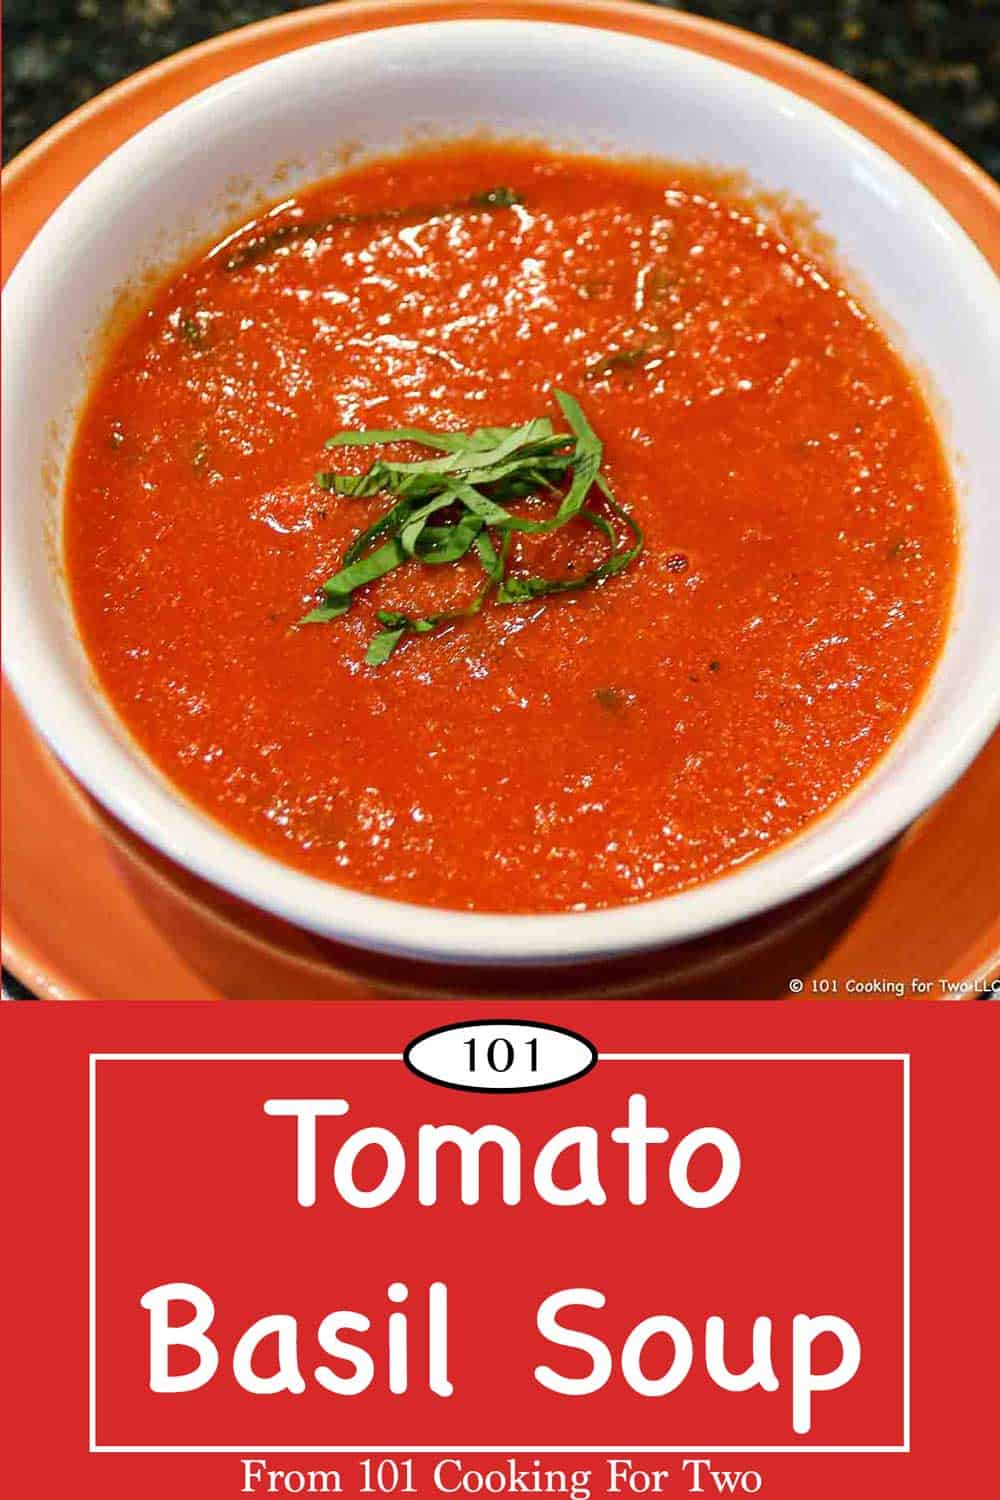 Tomato Basil Soup - 101 Cooking For Two